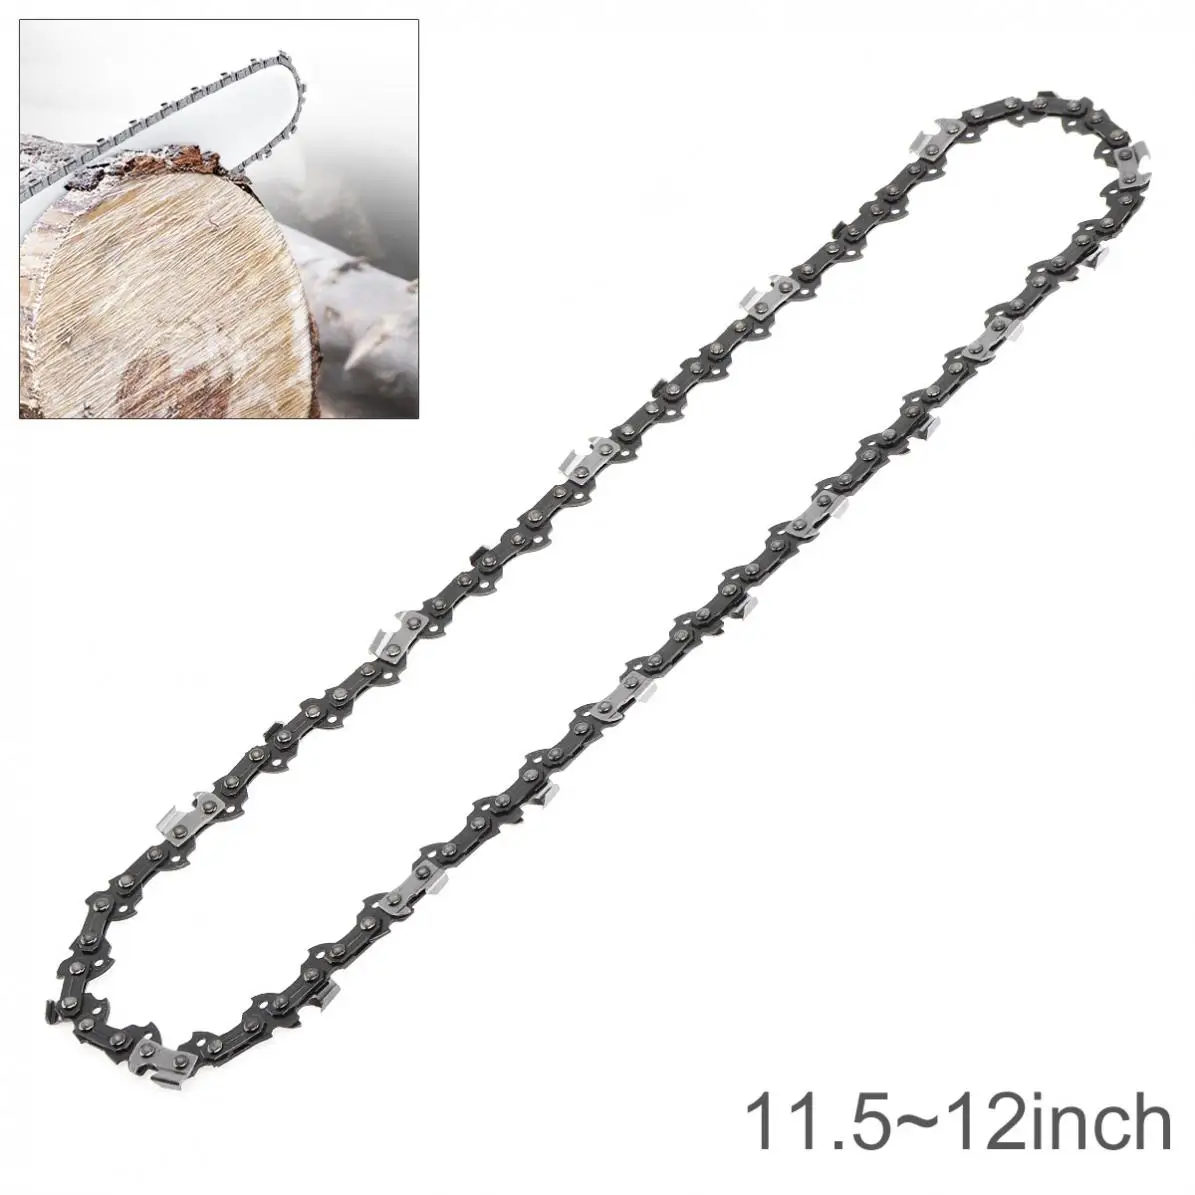 

12 Inch Chainsaw Chain 3/8 Pitch Saw Chain 45 Drive Link Electric Chainsaw Parts Chainsaw Blades For Guide Plate Angle Grinder